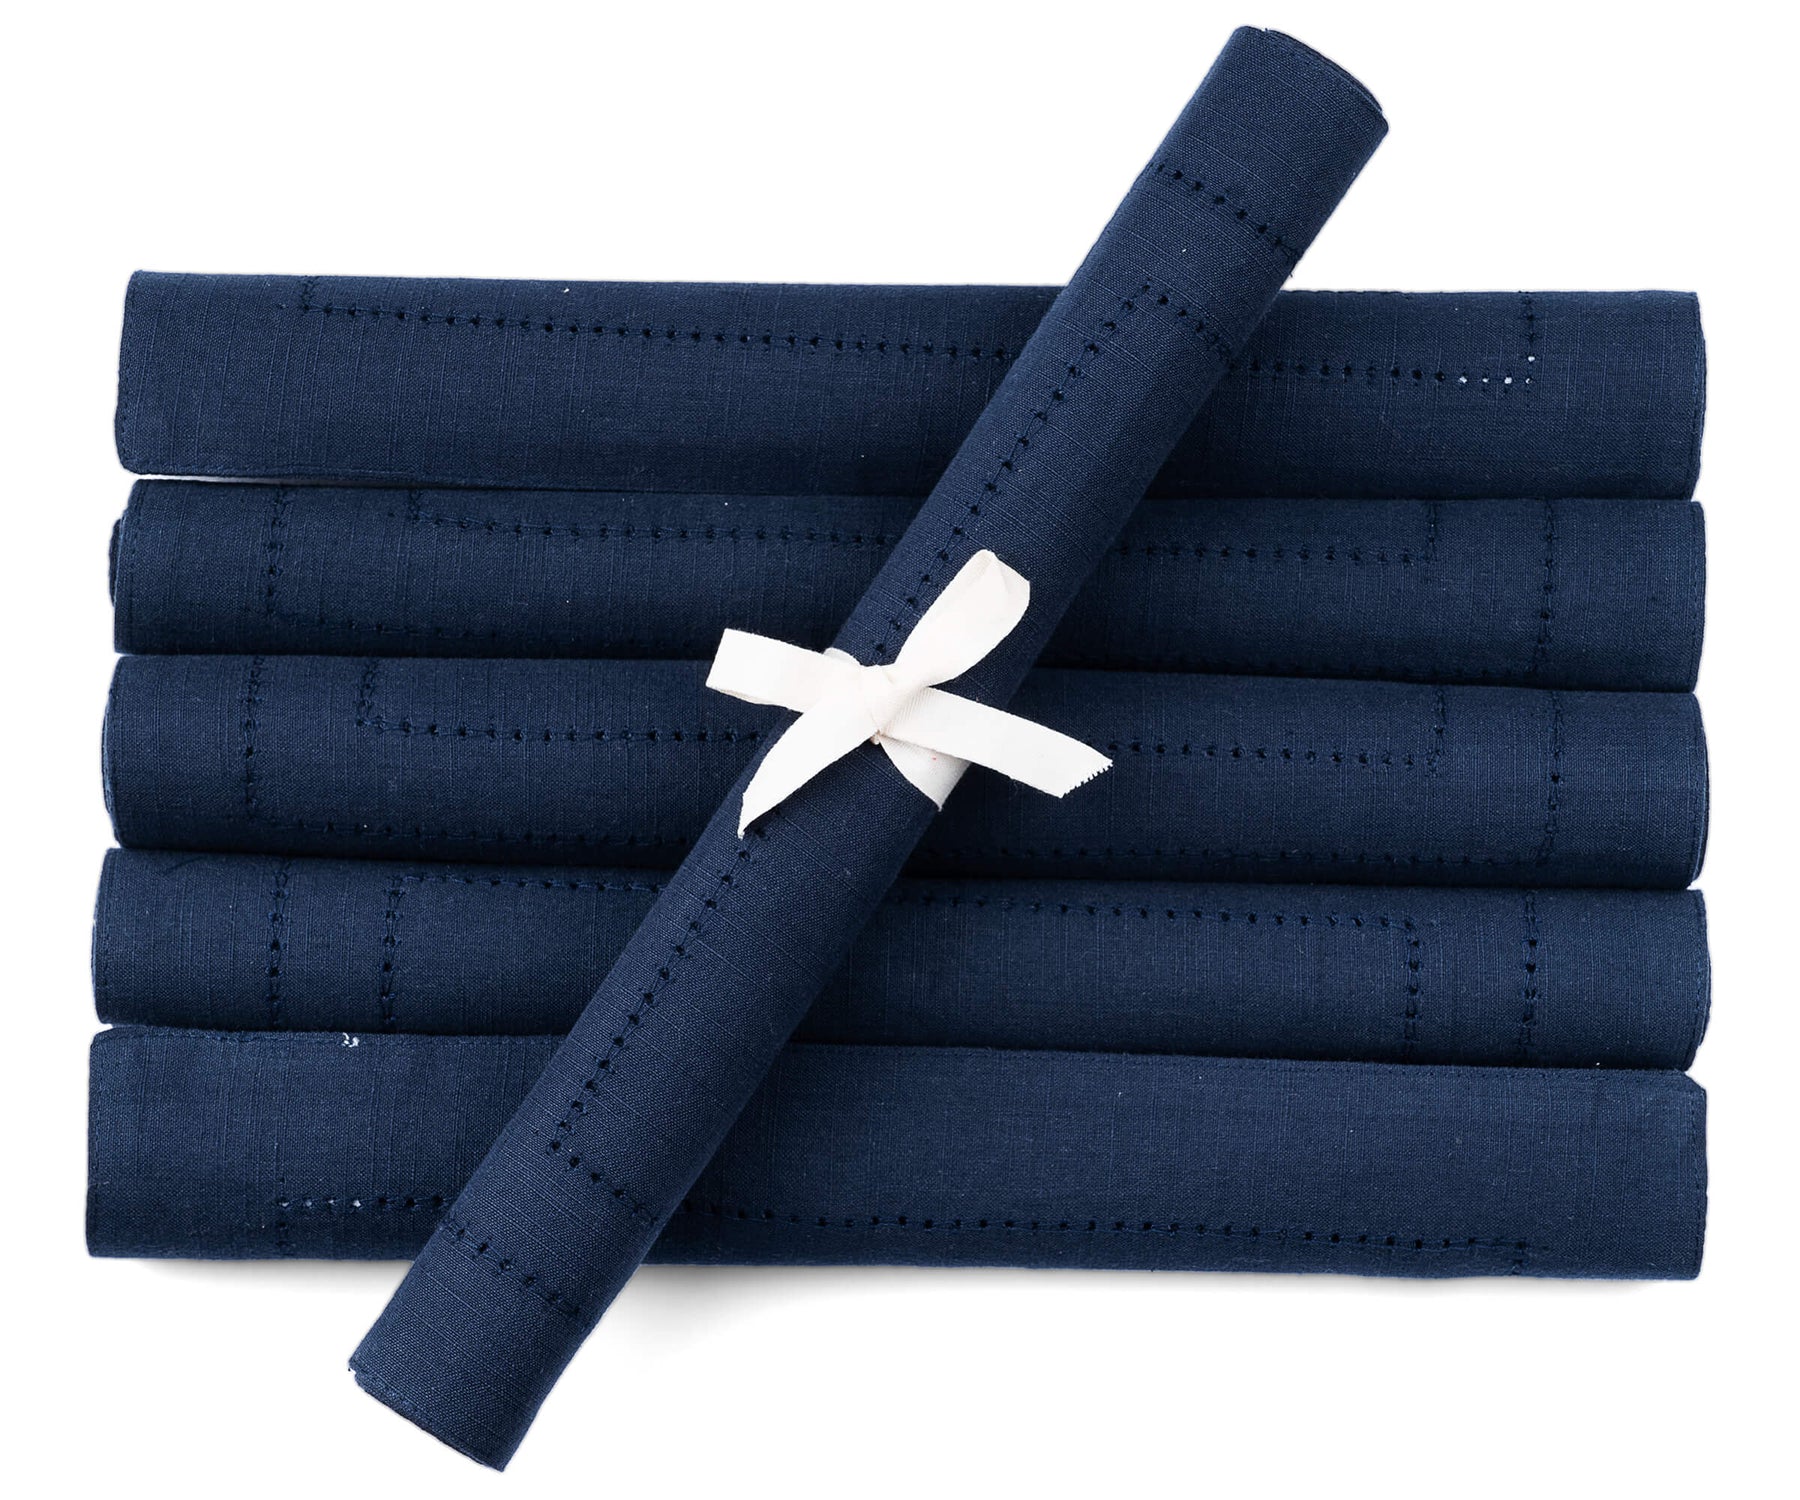 Rolled rectangular placemats of size 13×18",a set of 6 hem stitched navy blue table placemats are arranged in white background.